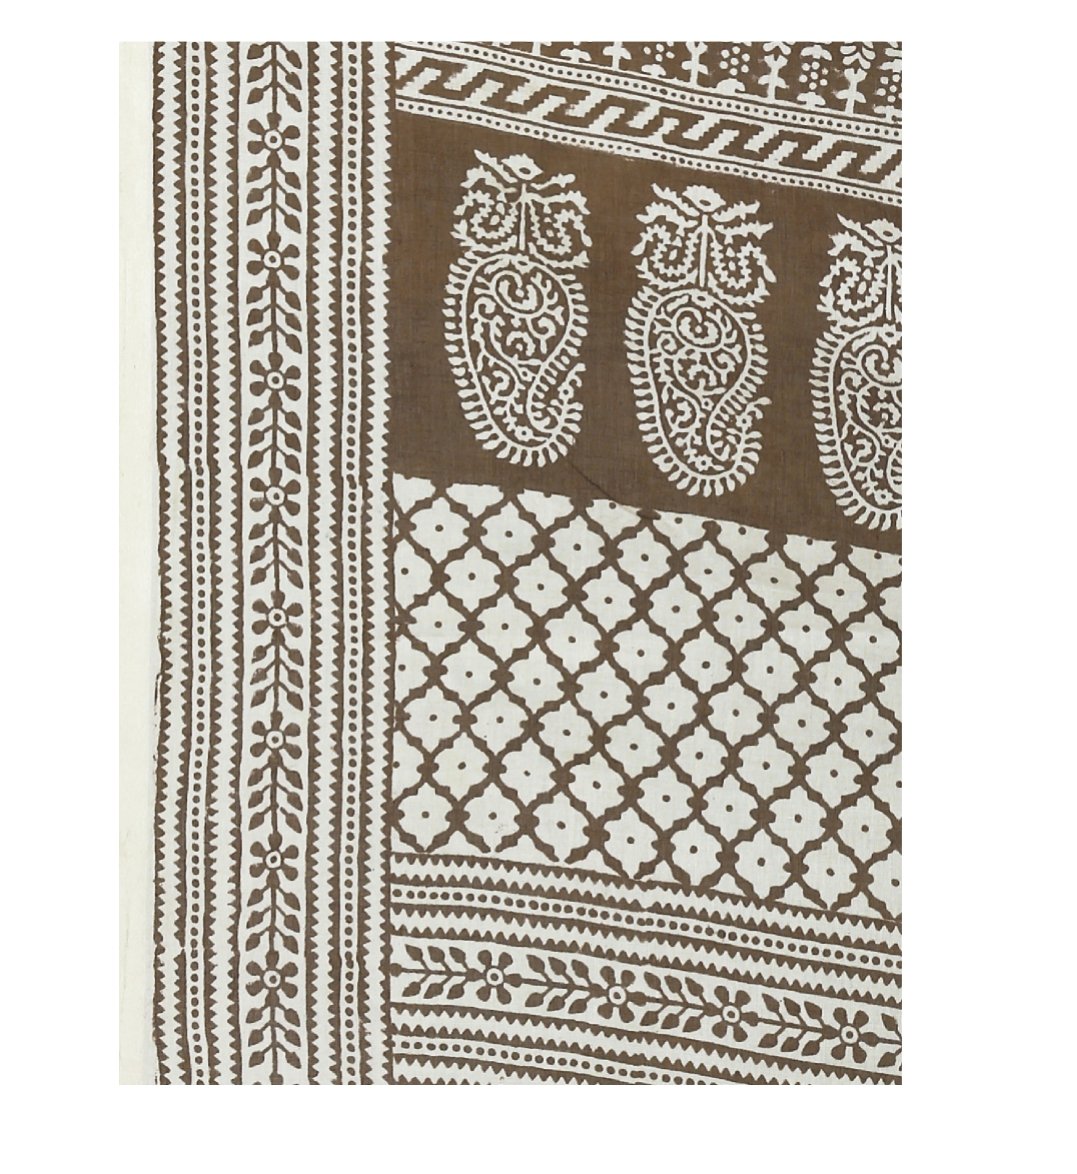 Off-White Cotton Hand Block Bagh Print Handcrafted Saree-Saree-Kalakari India-ZIBASA0040-Bagh, Cotton, Geographical Indication, Hand Blocks, Hand Crafted, Heritage Prints, Natural Dyes, Sarees, Sustainable Fabrics-[Linen,Ethnic,wear,Fashionista,Handloom,Handicraft,Indigo,blockprint,block,print,Cotton,Chanderi,Blue, latest,classy,party,bollywood,trendy,summer,style,traditional,formal,elegant,unique,style,hand,block,print, dabu,booti,gift,present,glamorous,affordable,collectible,Sari,Saree,printed